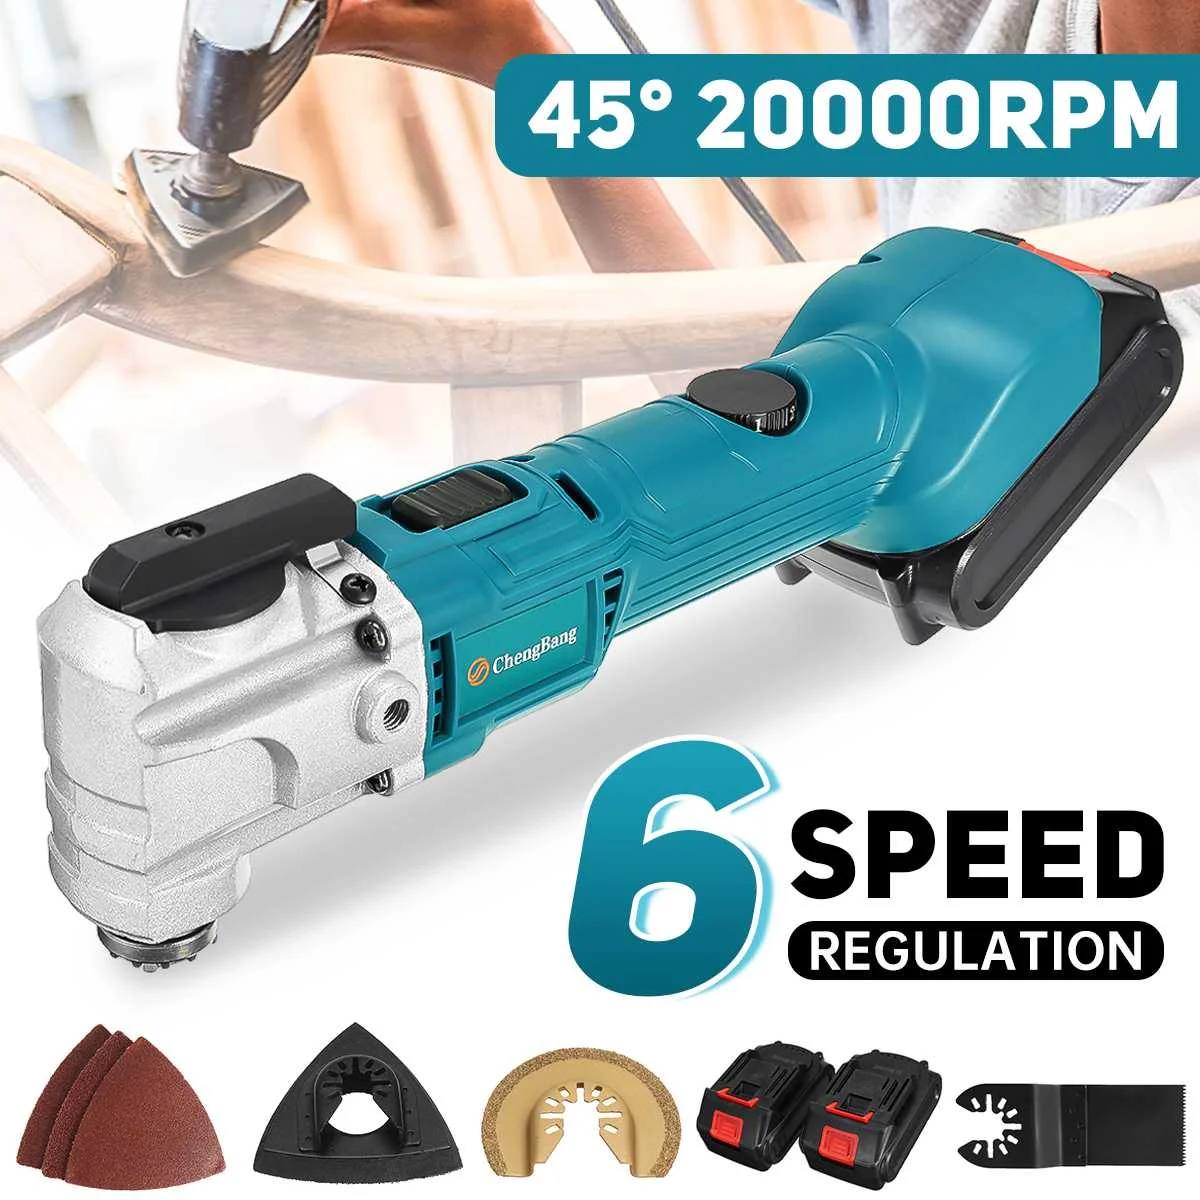 Cordless Oscillating Multi Tool Electric Saw Electric Cutting Trimming Machine Renovation Power with 1/2pcs Battery Saw Blade